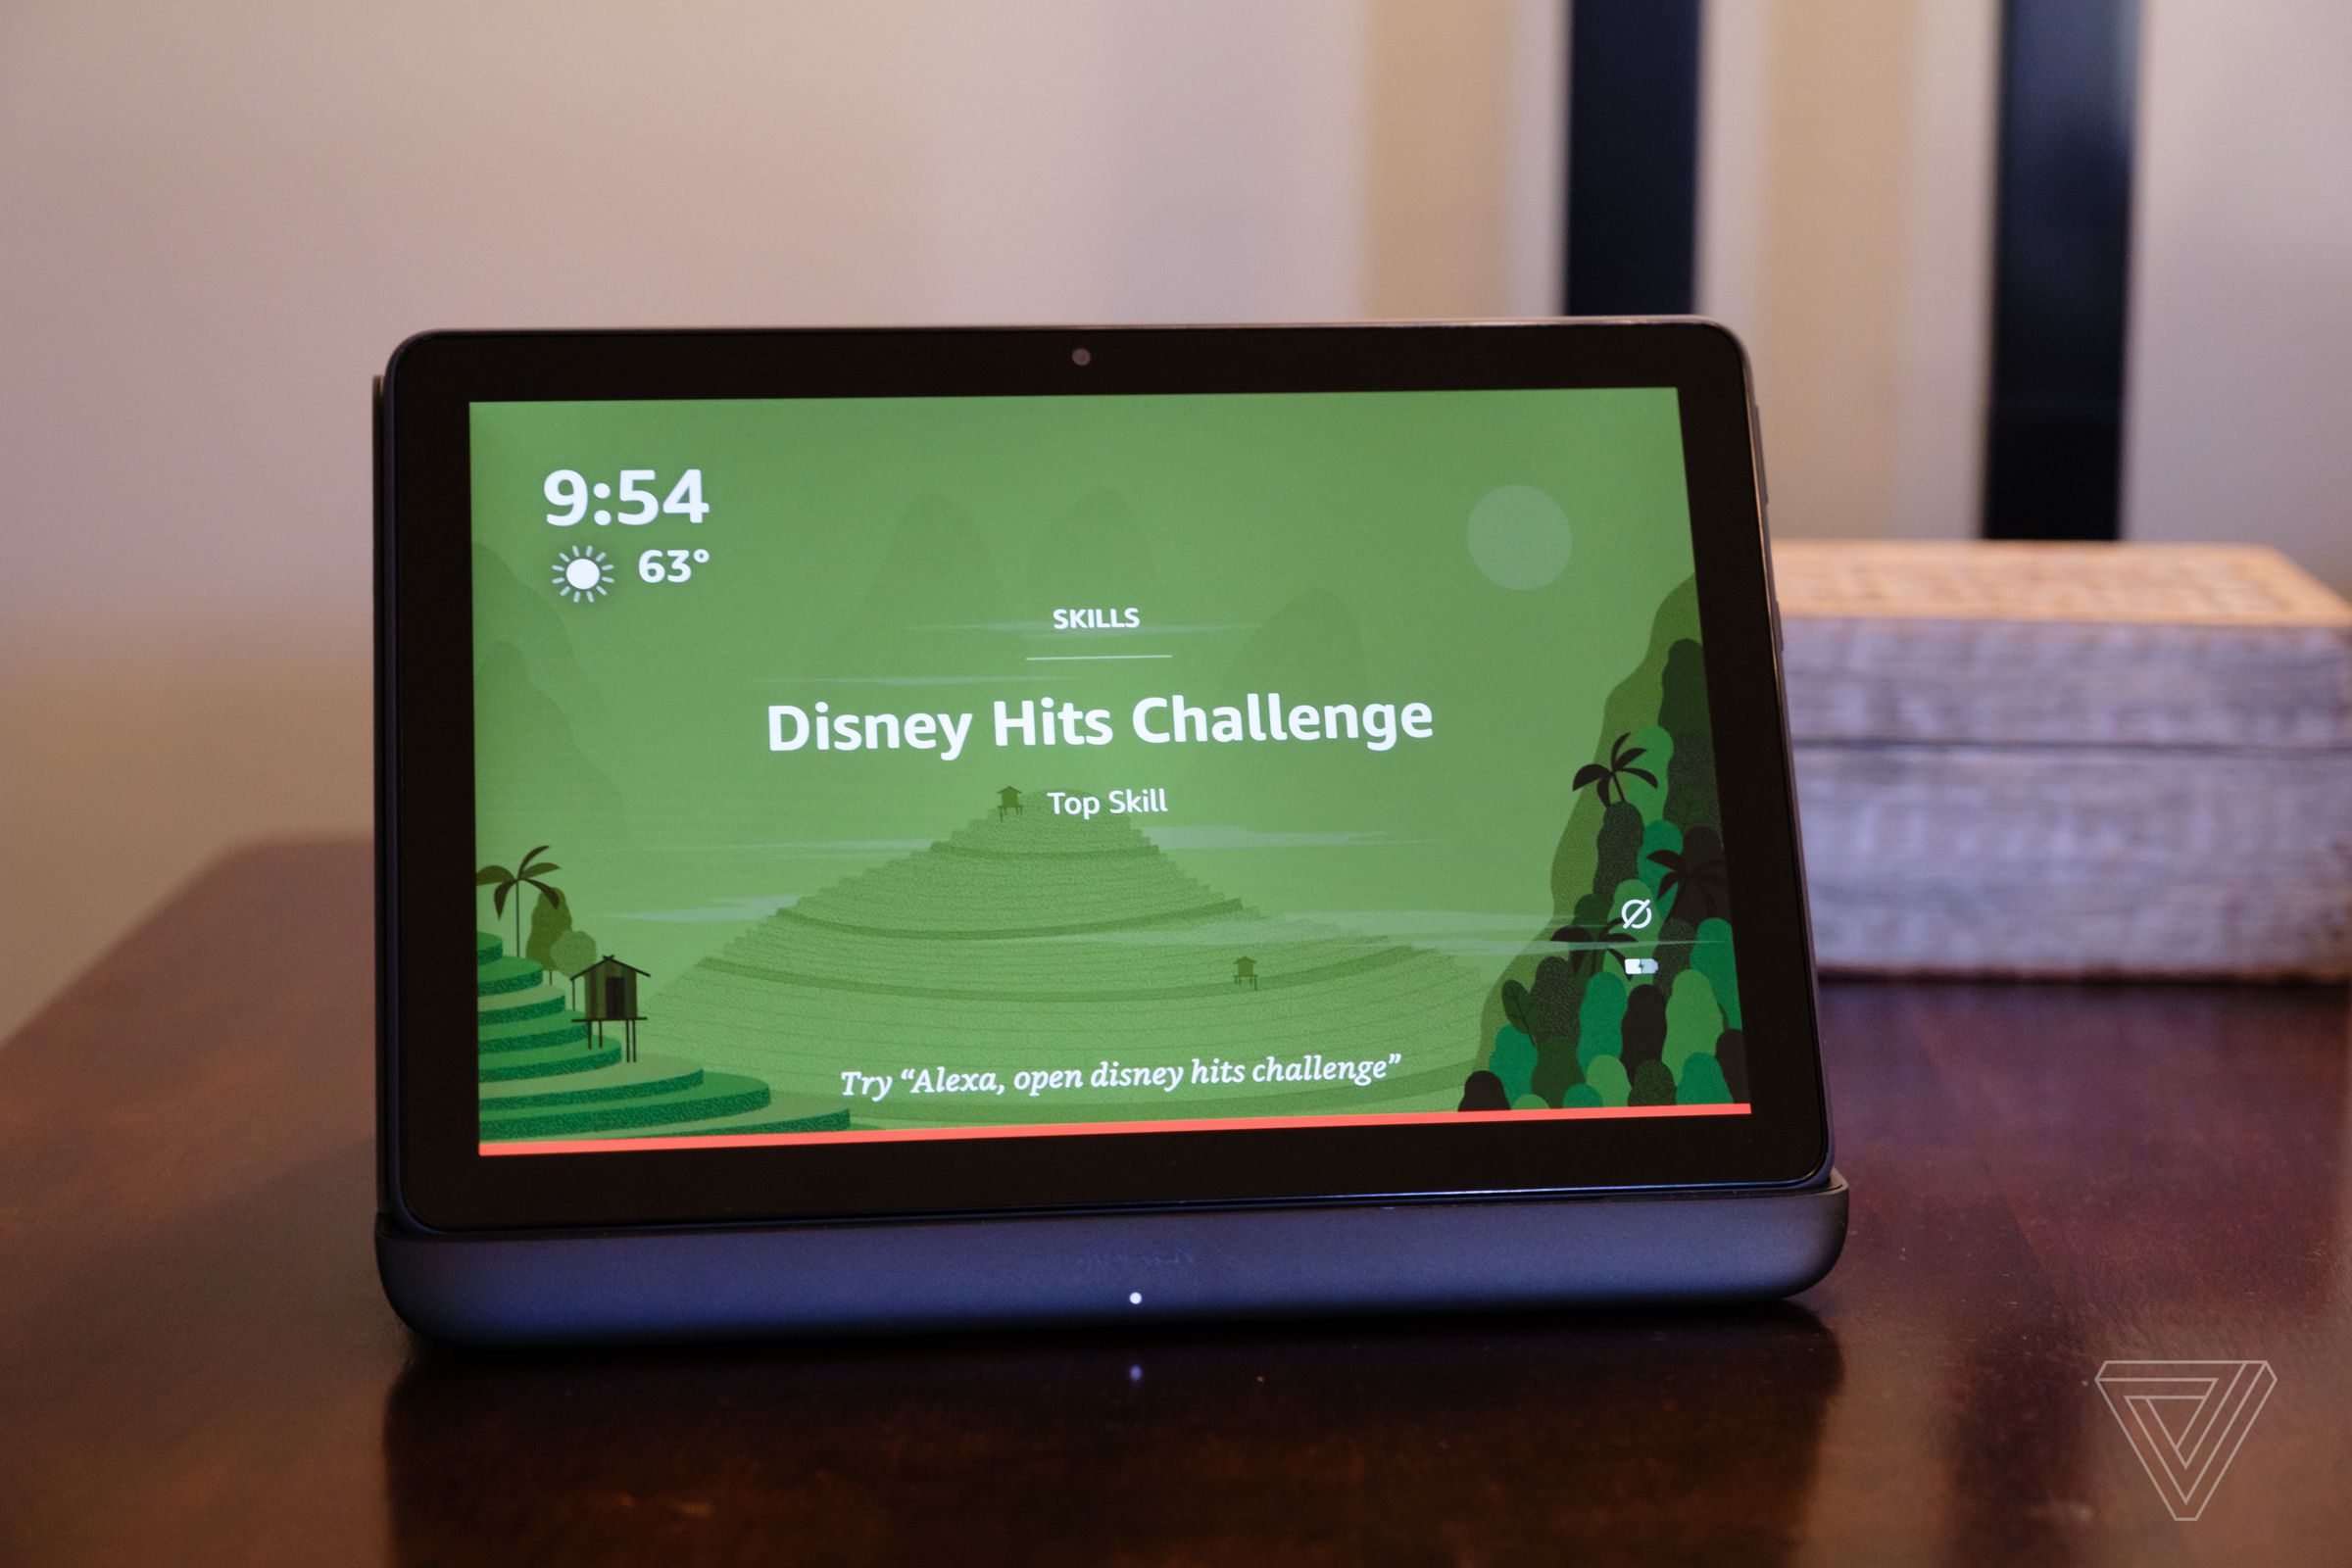 The Fire HD 10 Plus supports wireless charging and can act as an Alexa-powered smart display when it’s on a dock.